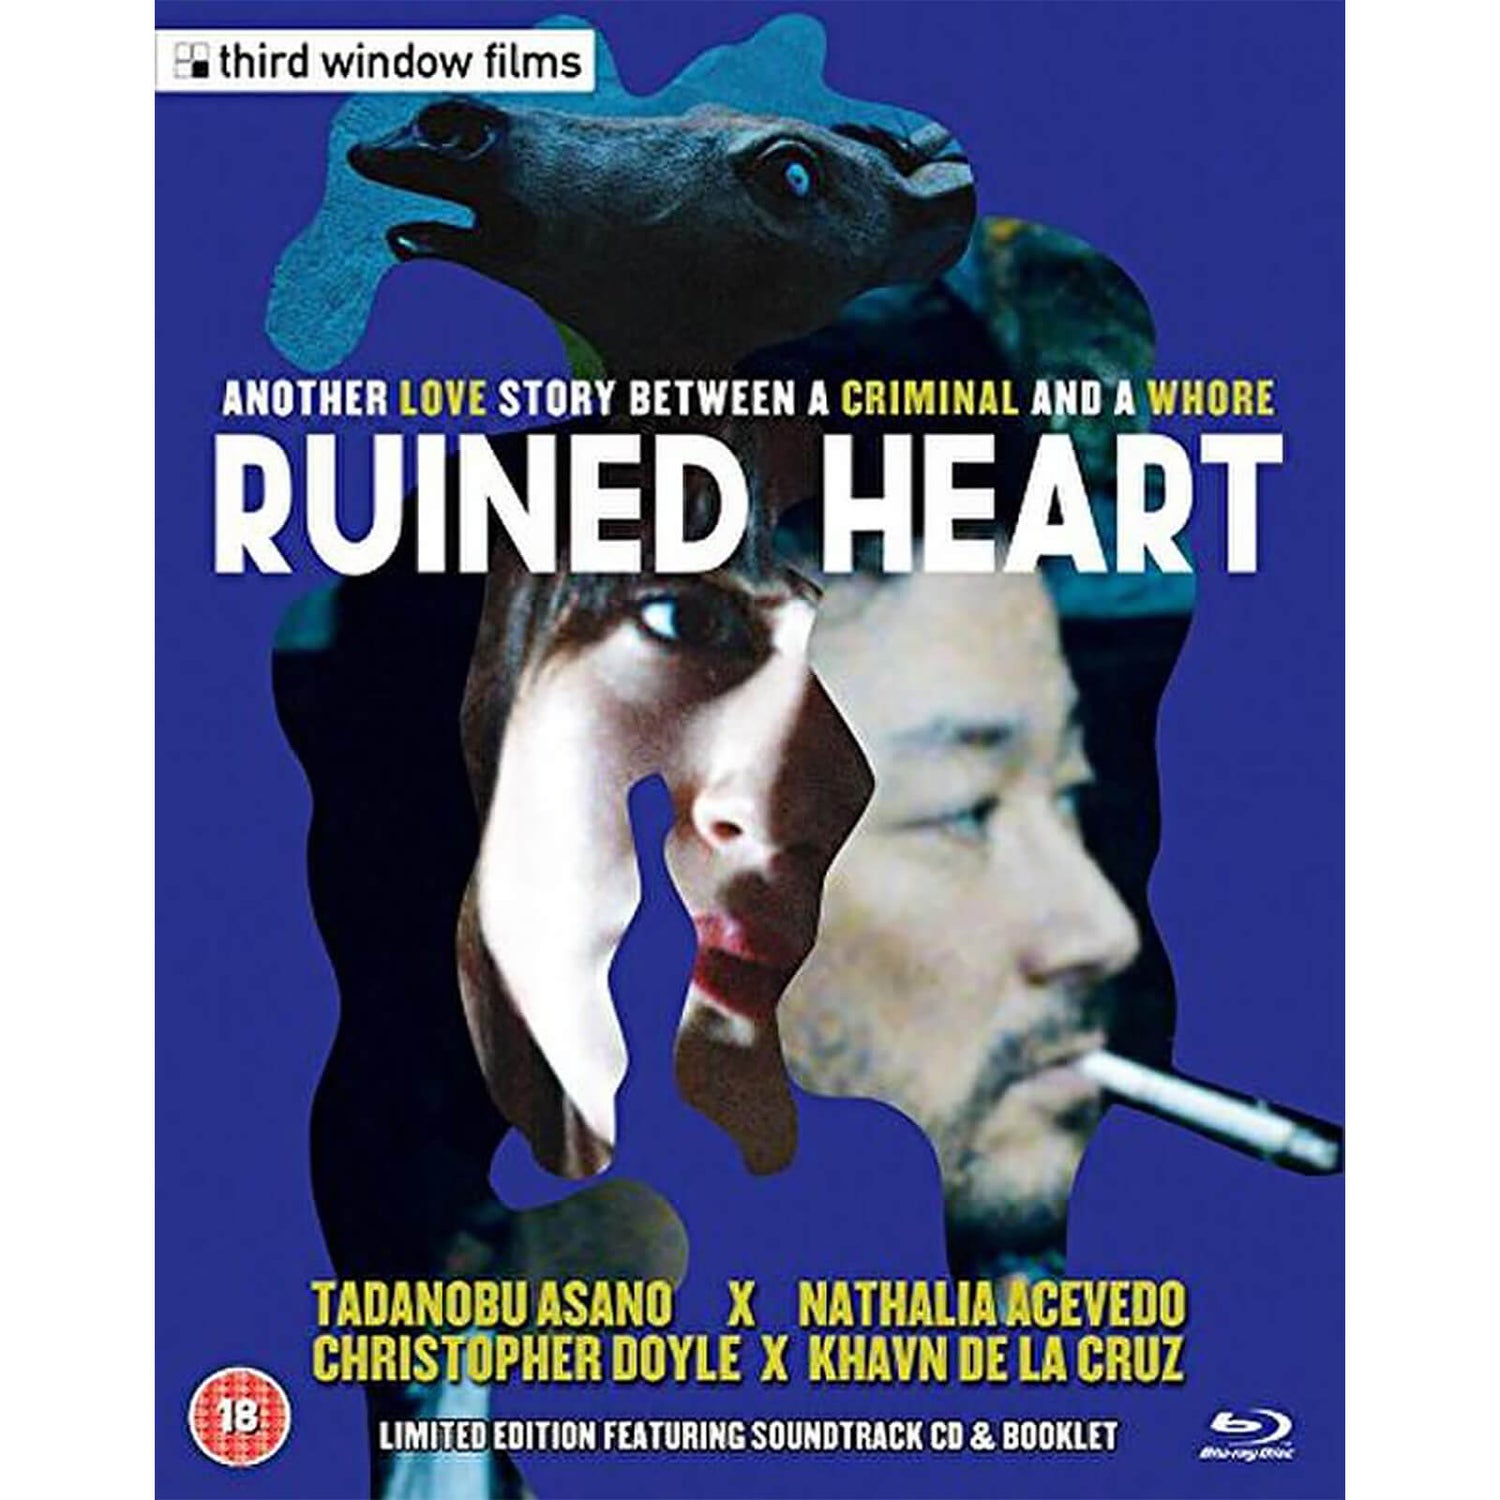 Ruined Heart: Another Love Story Between A Criminal And A Whore Limited Edition Blu-ray+CD